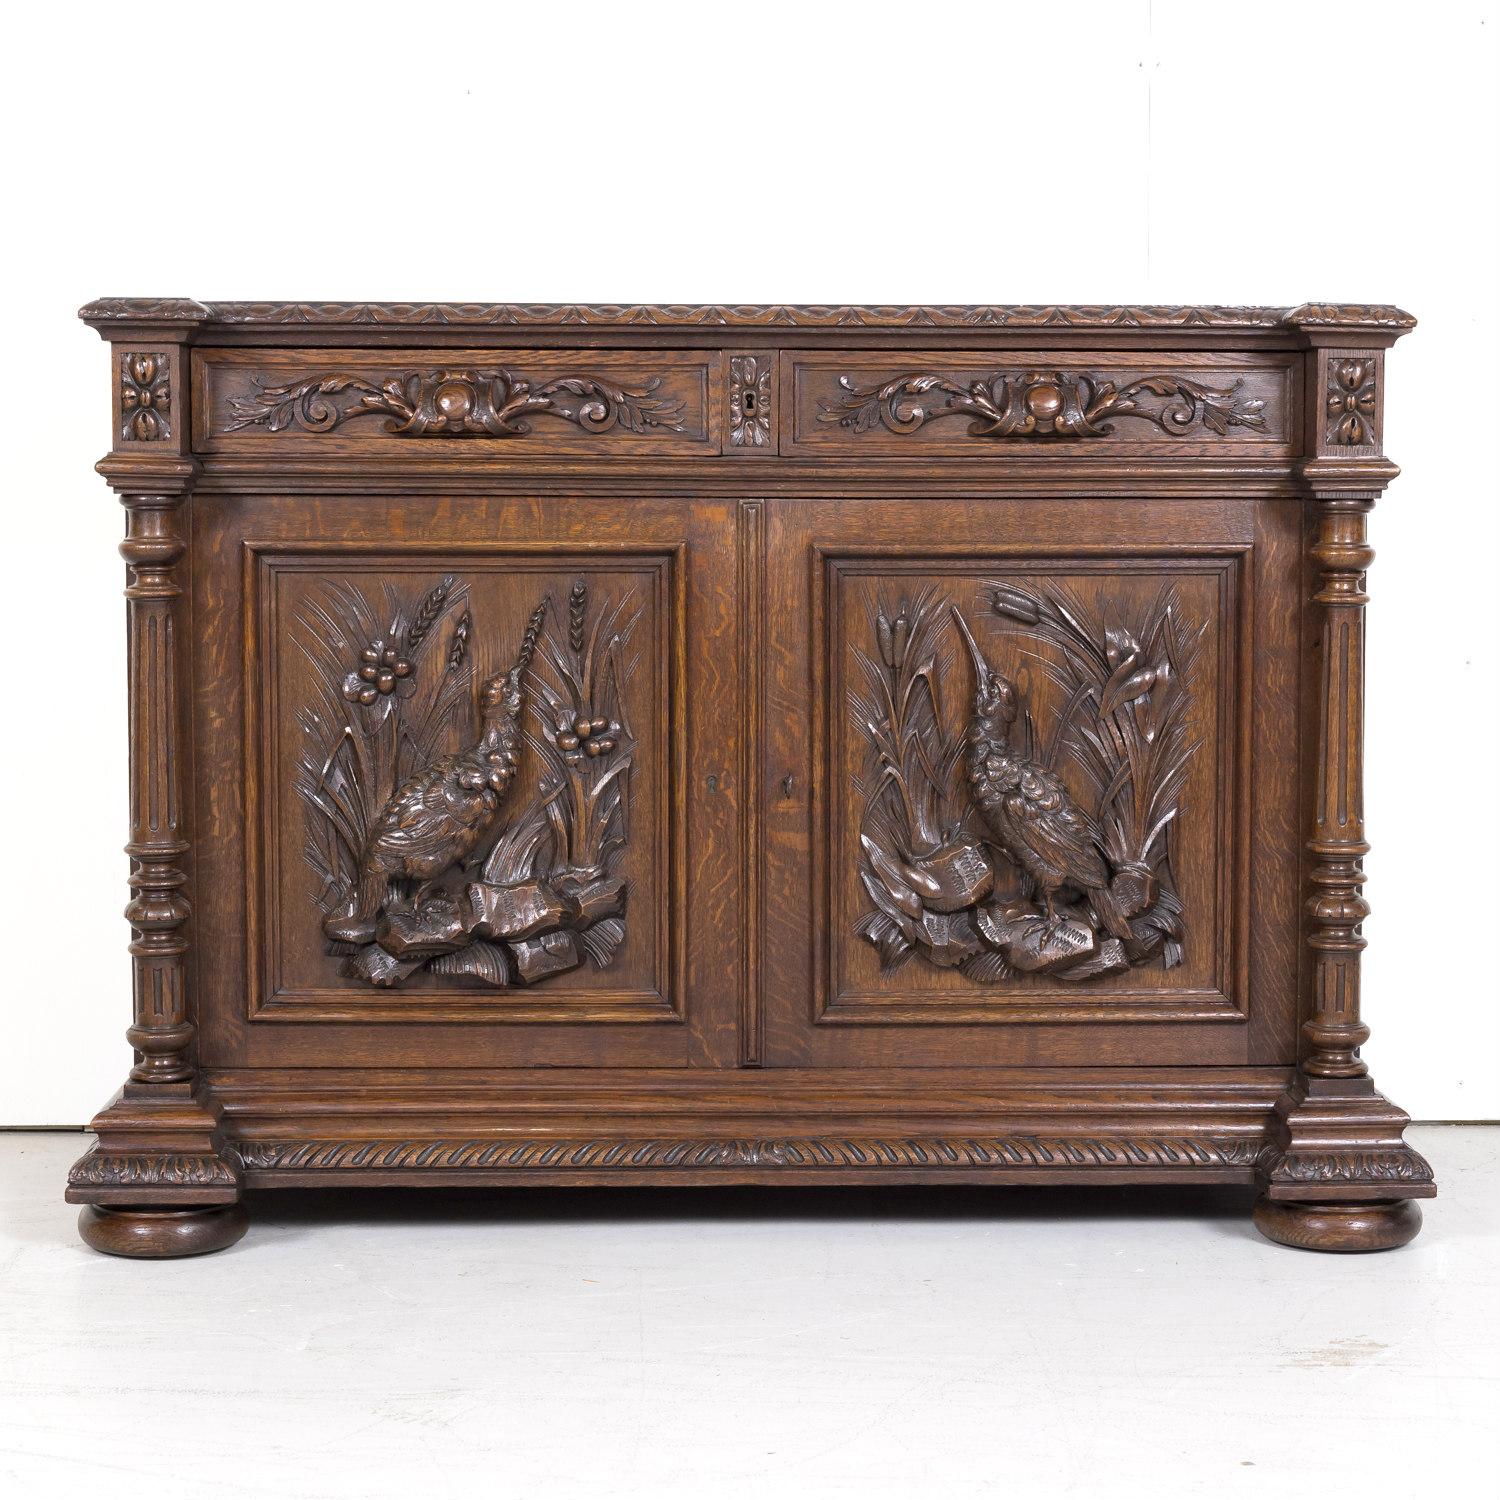 Exceptional 19th century Louis XIII style buffet de chasse or hunt buffet handcrafted by talented artisans in the Normandy region of old growth French oak, circa 1870s. This handsome French Renaissance buffet features carved gadrooning on the top